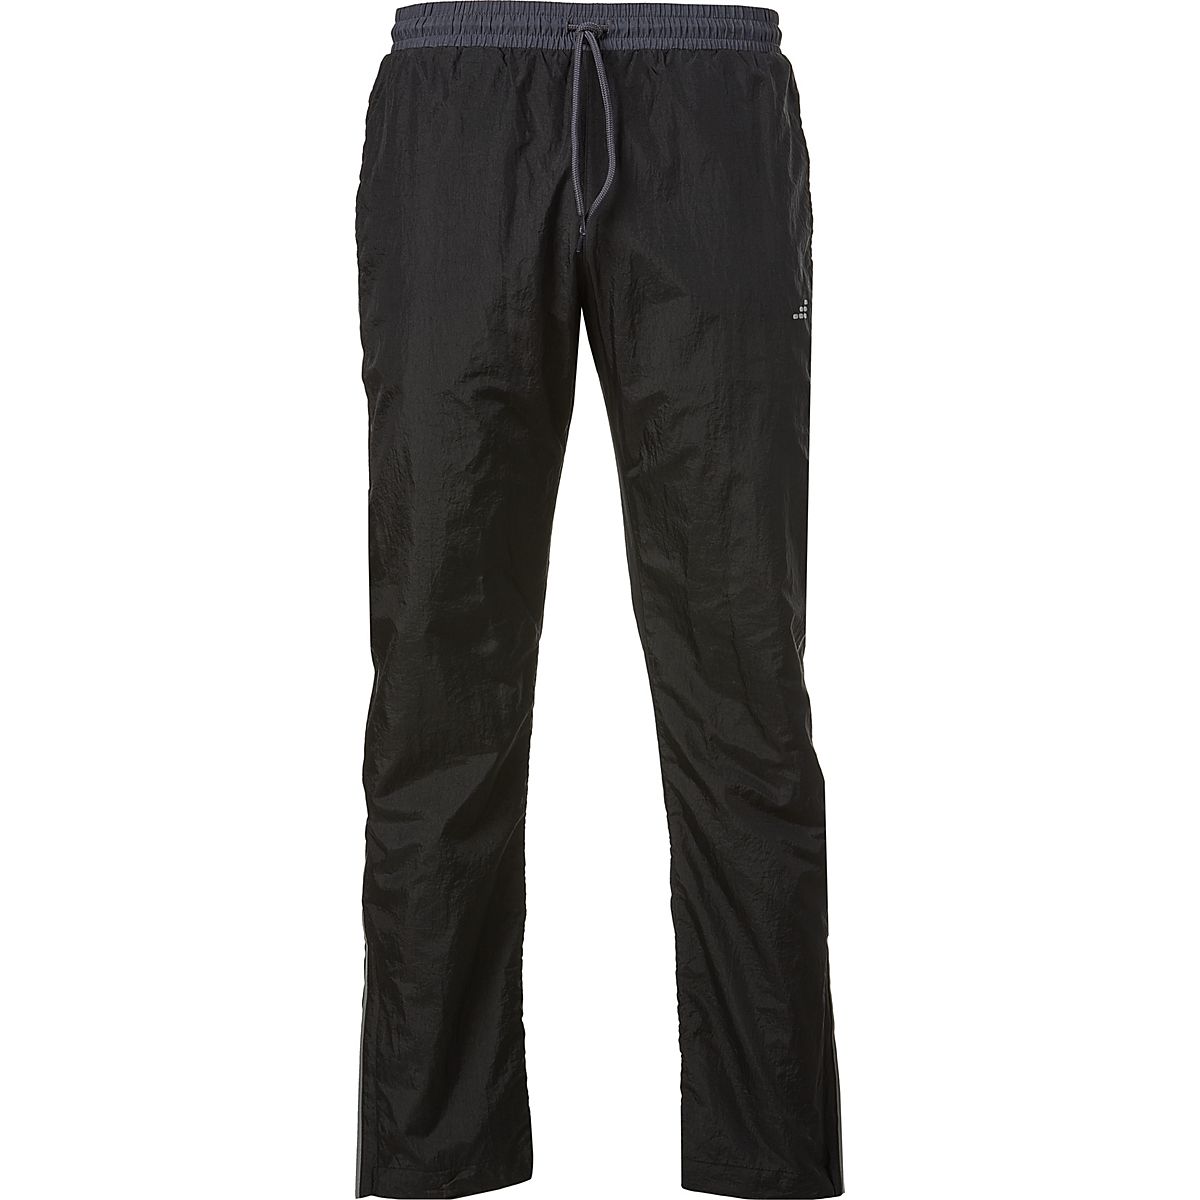 BCG Men's Woven Crinkle Pants | Free Shipping at Academy